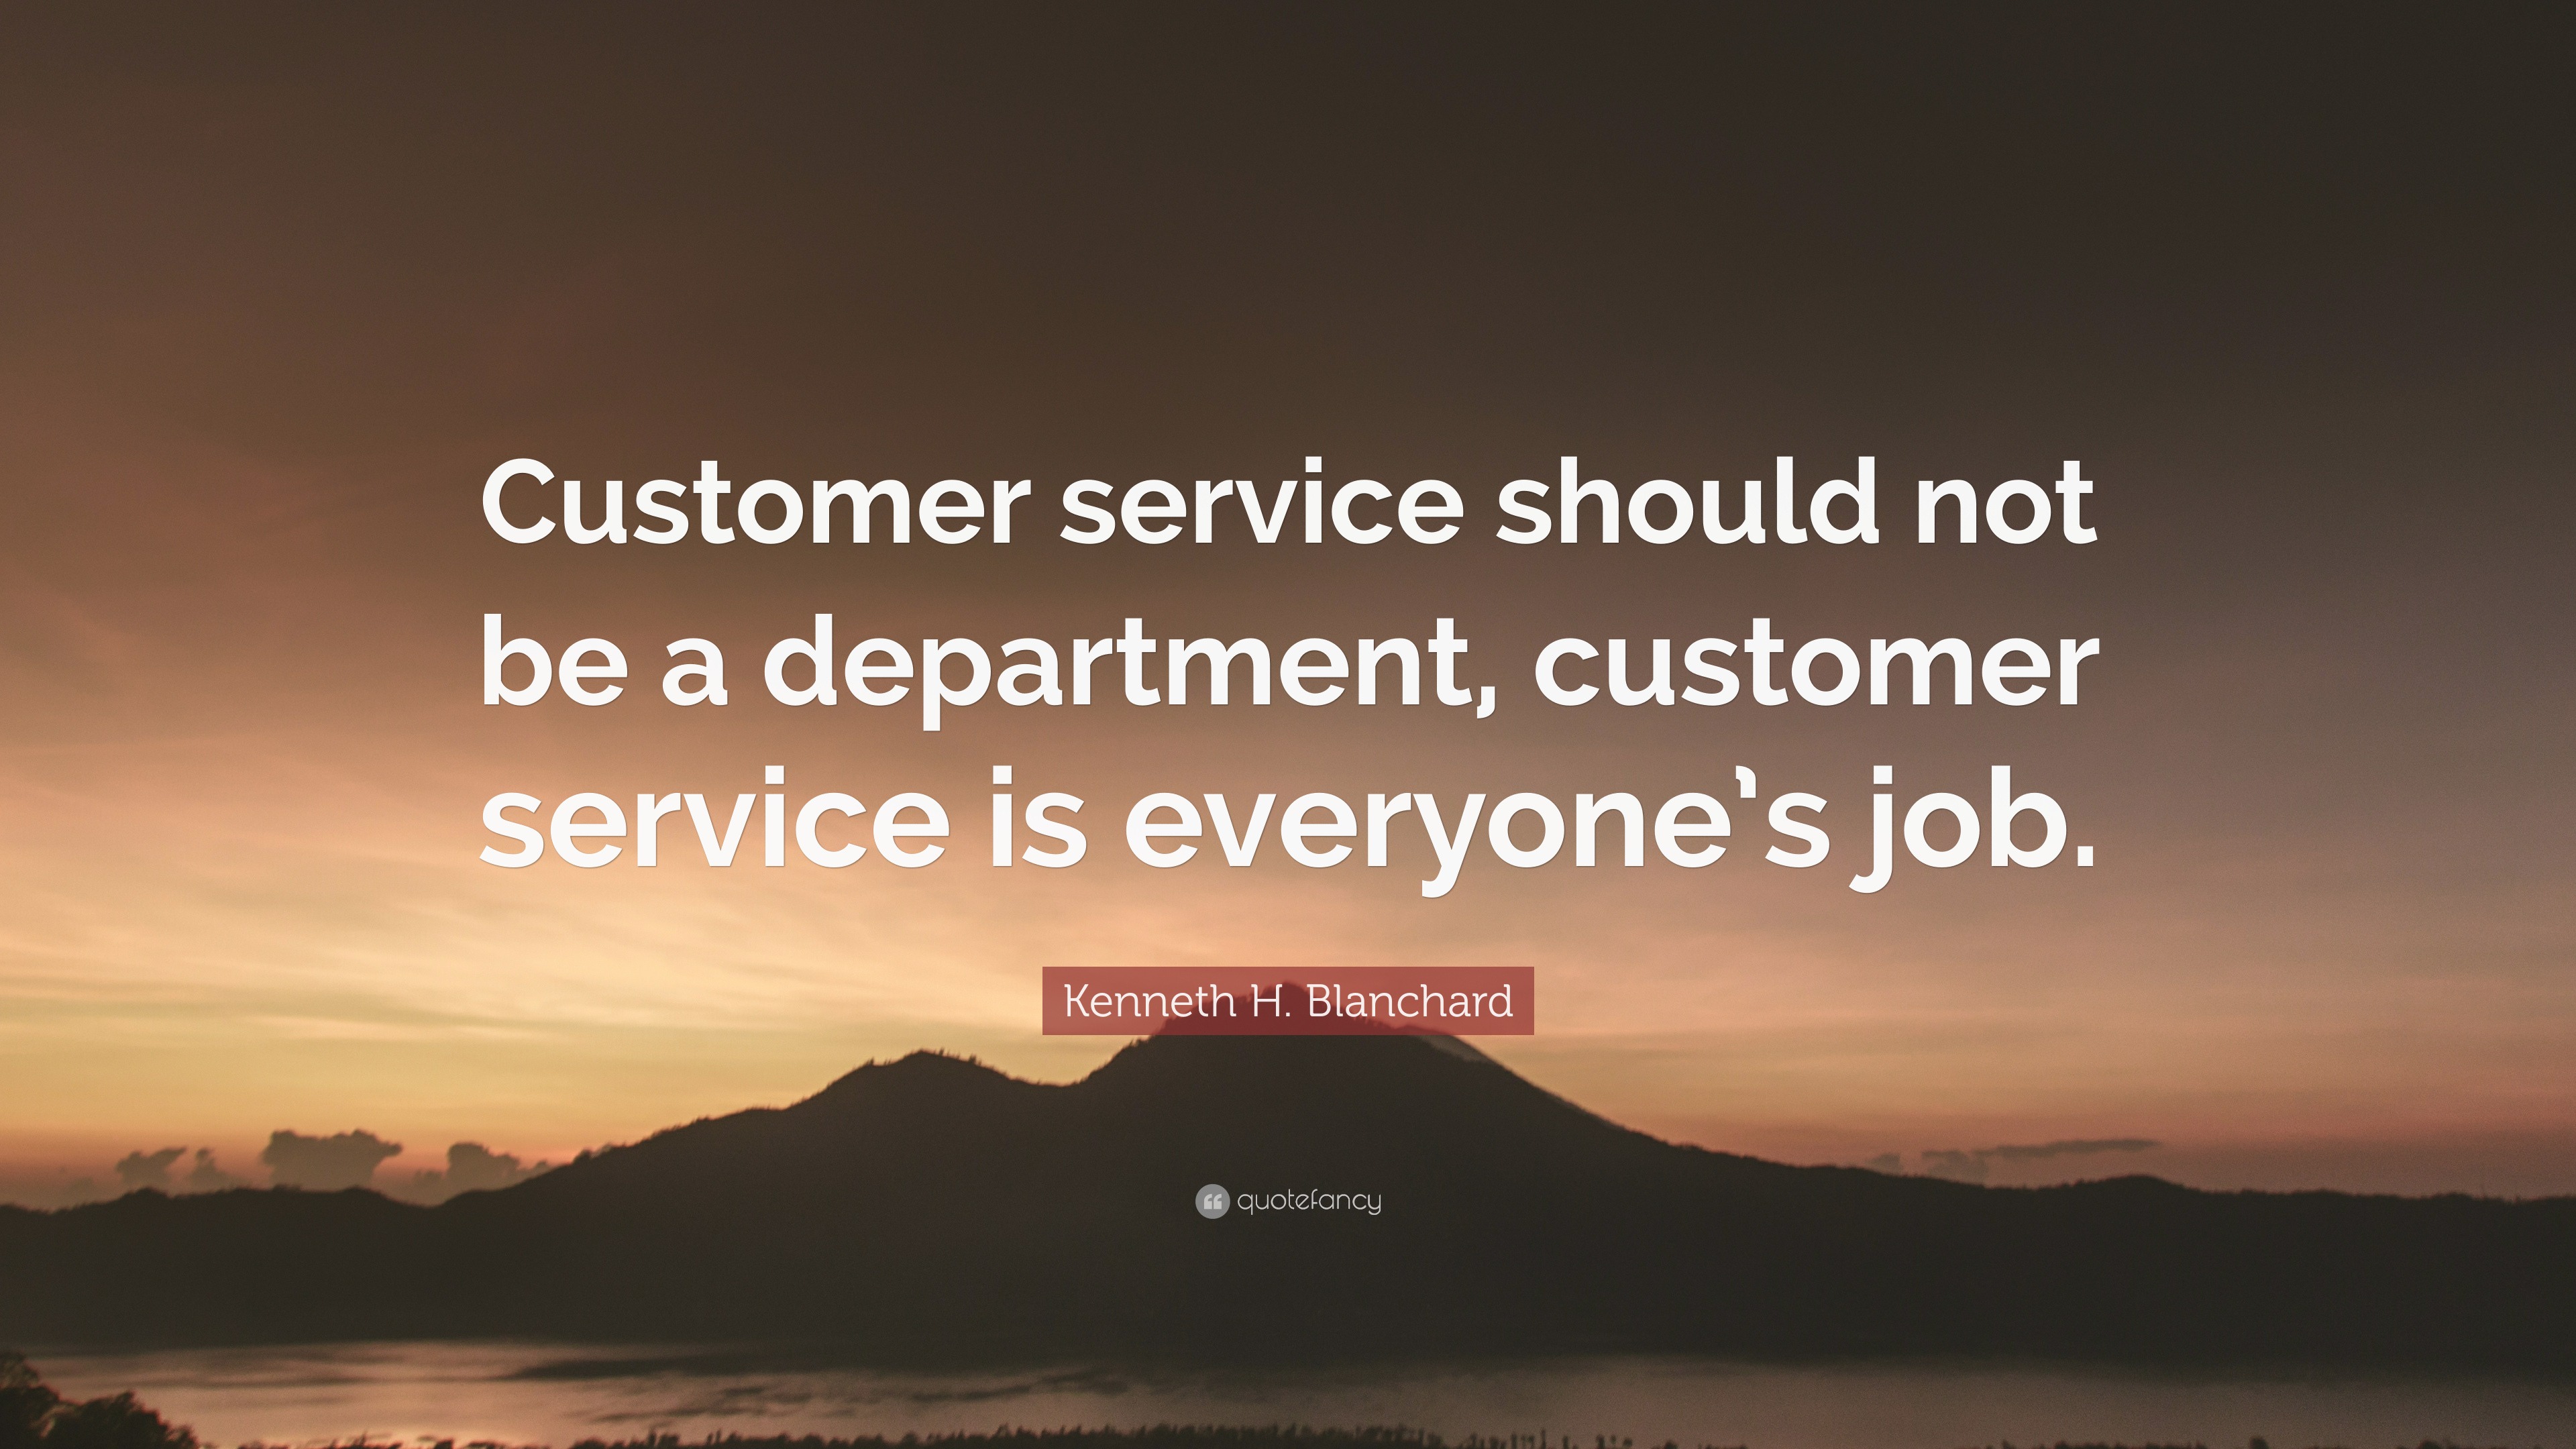 Kenneth H. Blanchard Quote: “Customer service should not be a